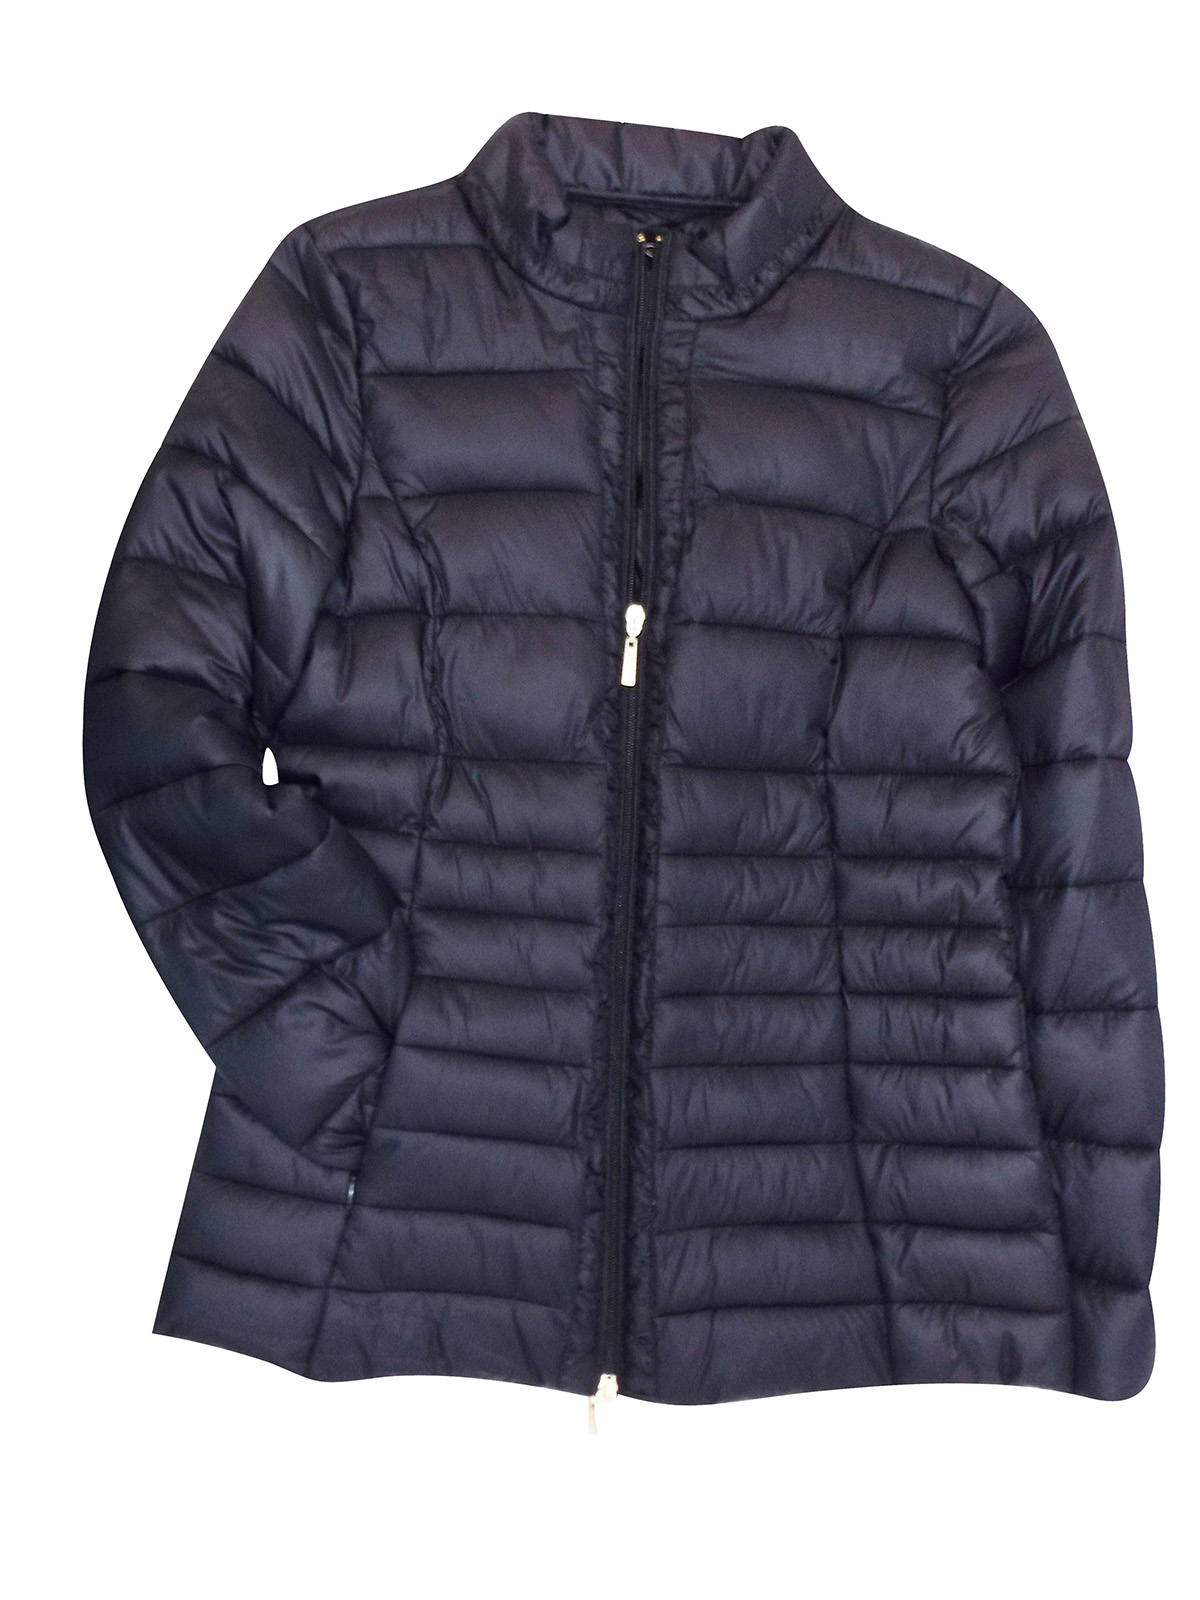 David Barry - - David Barry BLACK Quilted Zip Puffer Jacket - Size 10 to 24